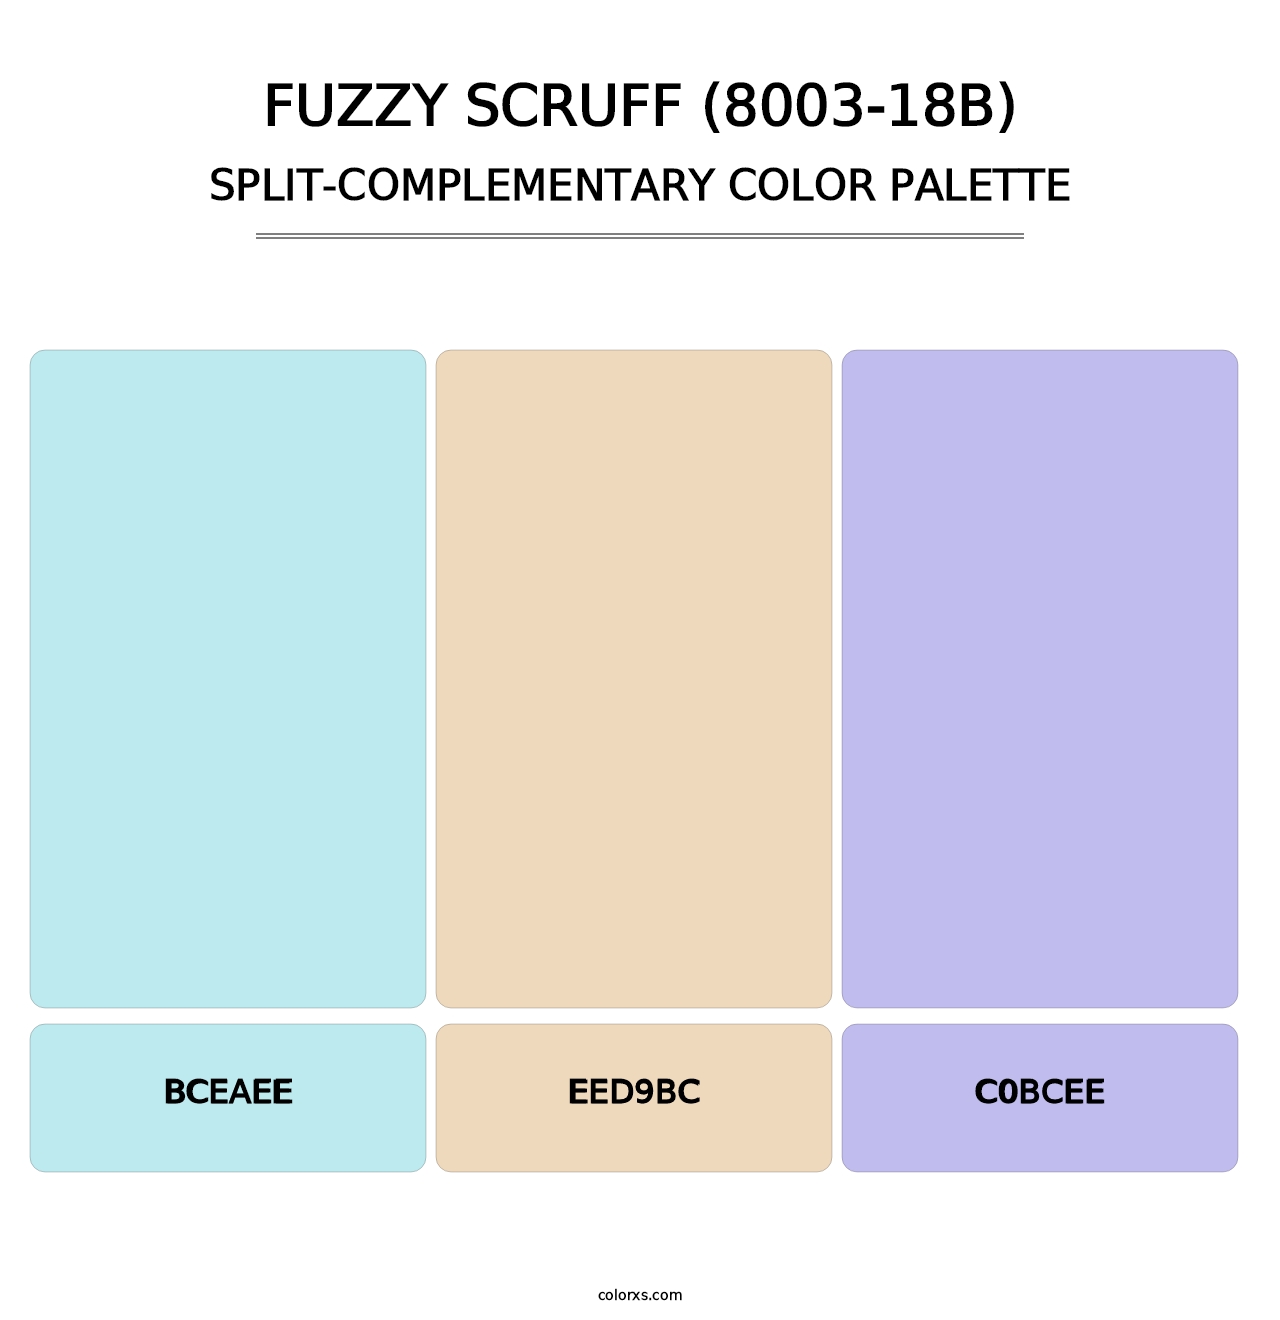 Fuzzy Scruff (8003-18B) - Split-Complementary Color Palette